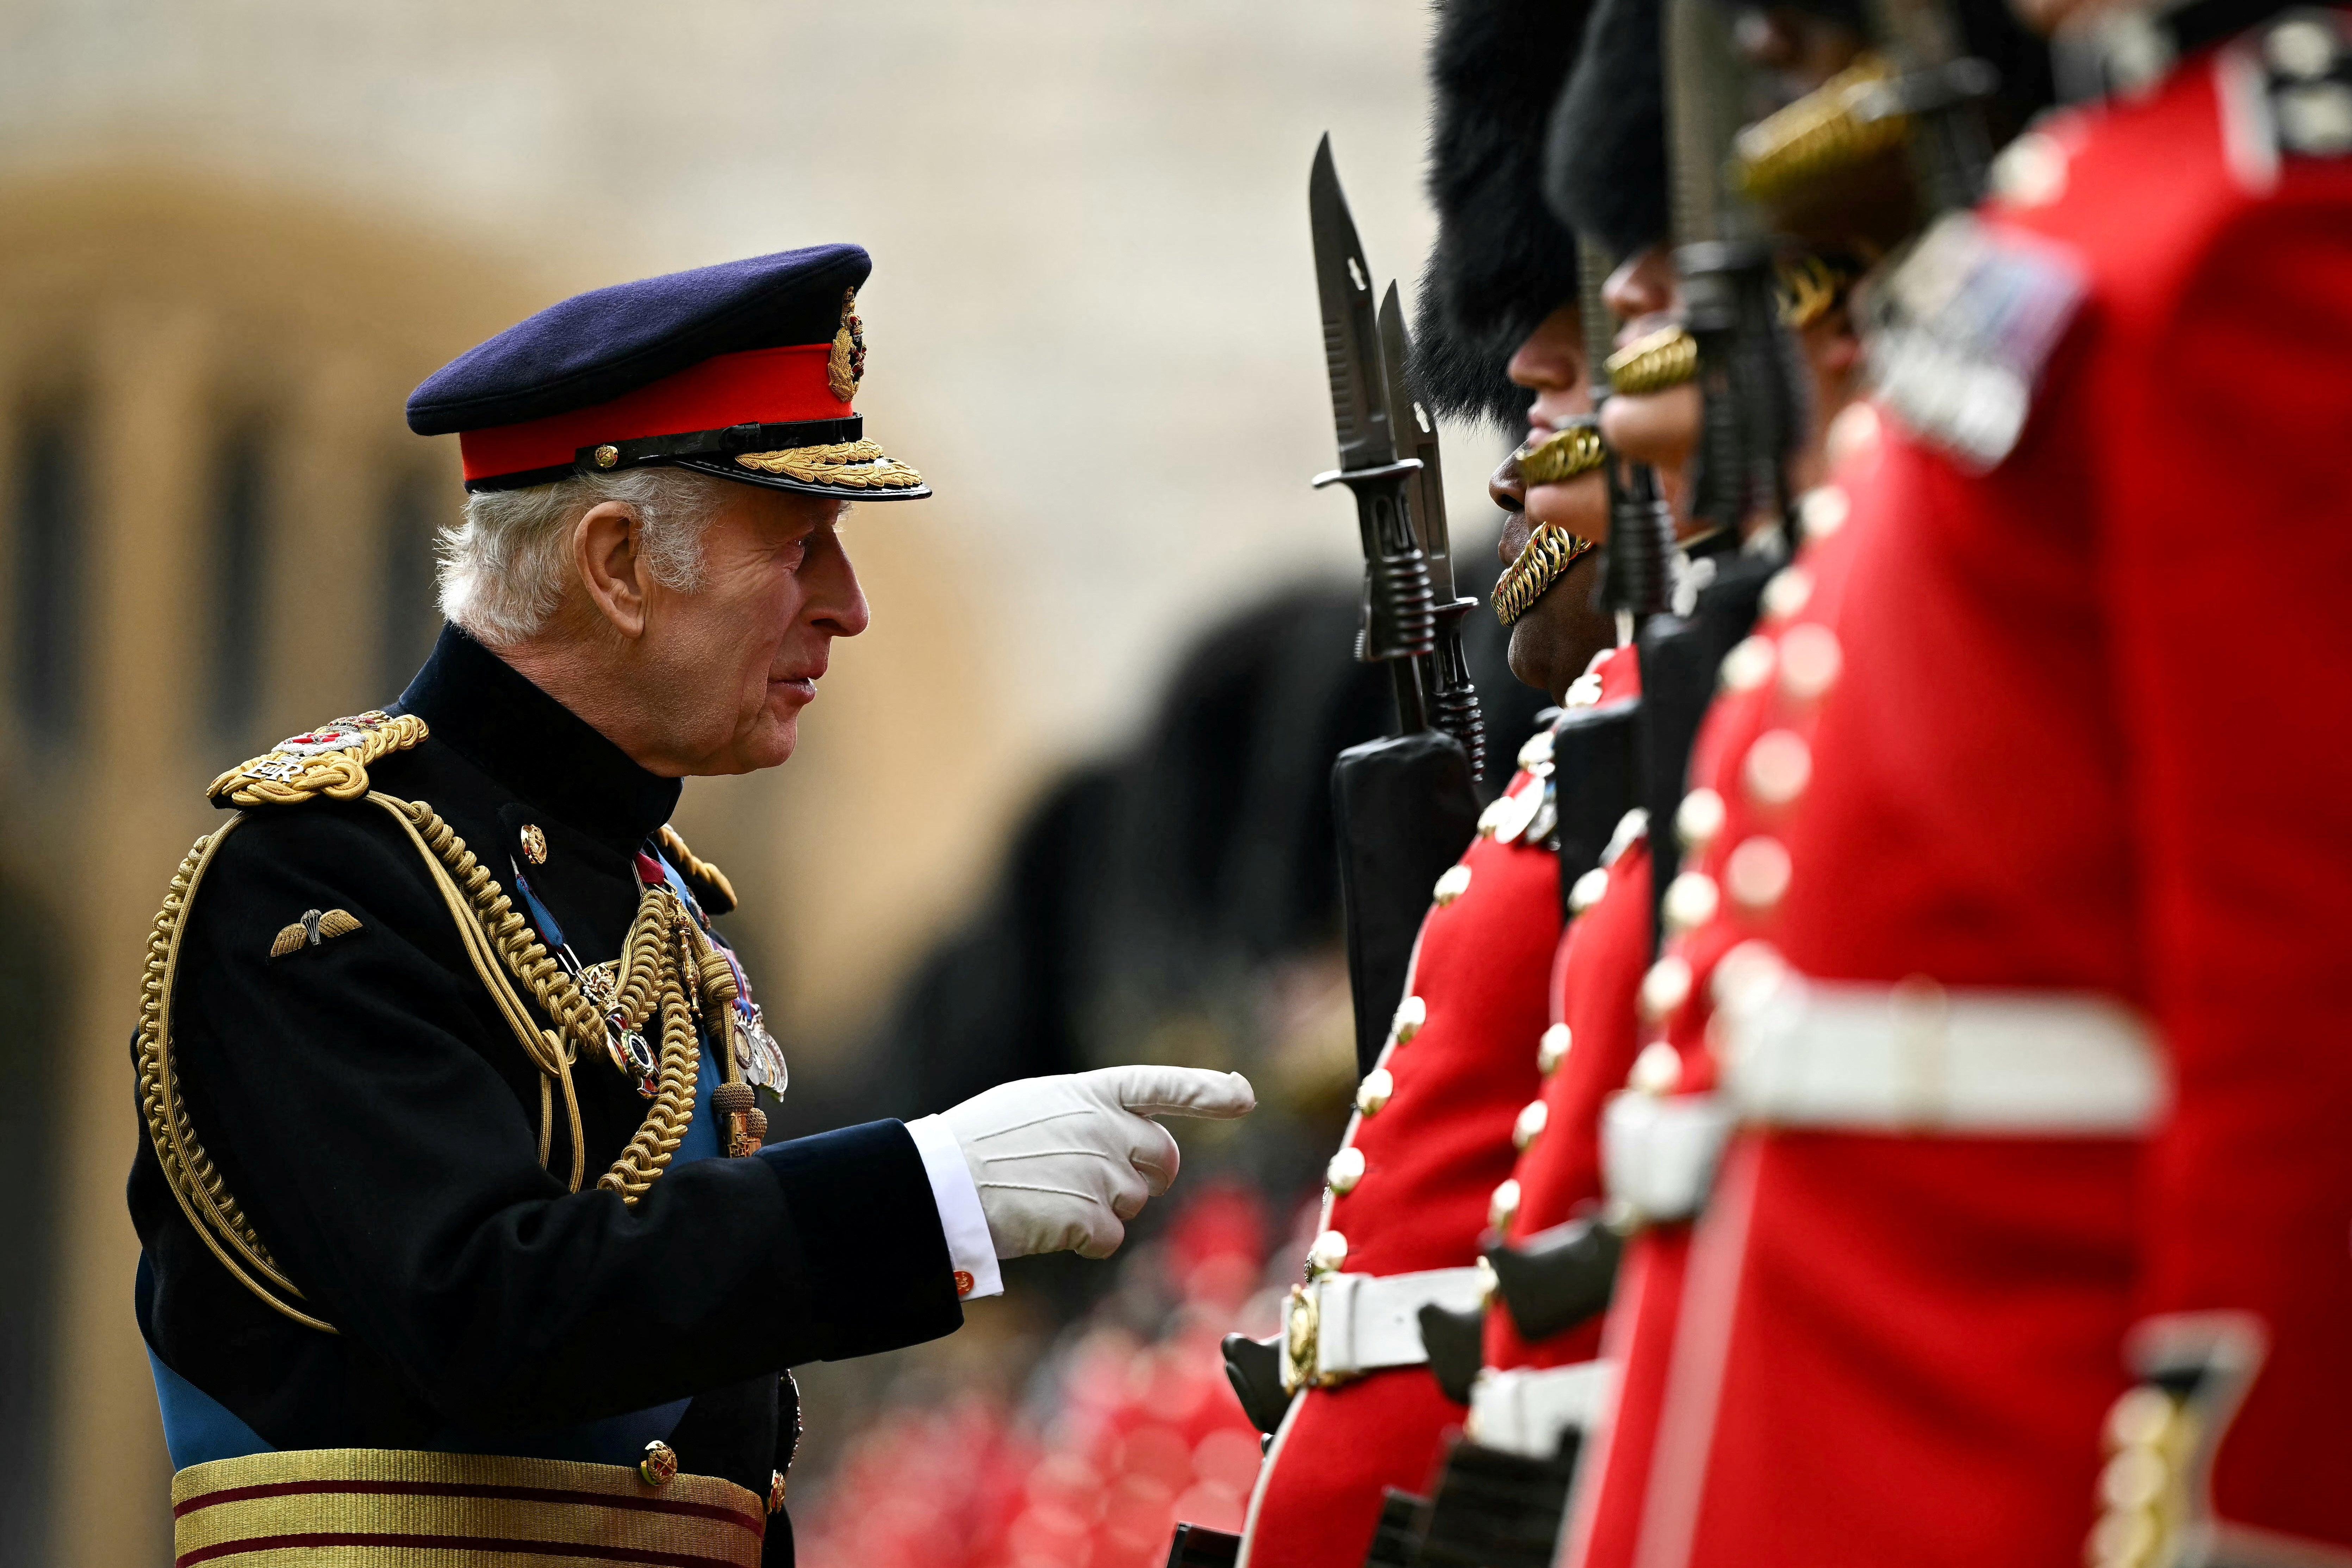 This will be Charles' second time Trooping the Color as King.